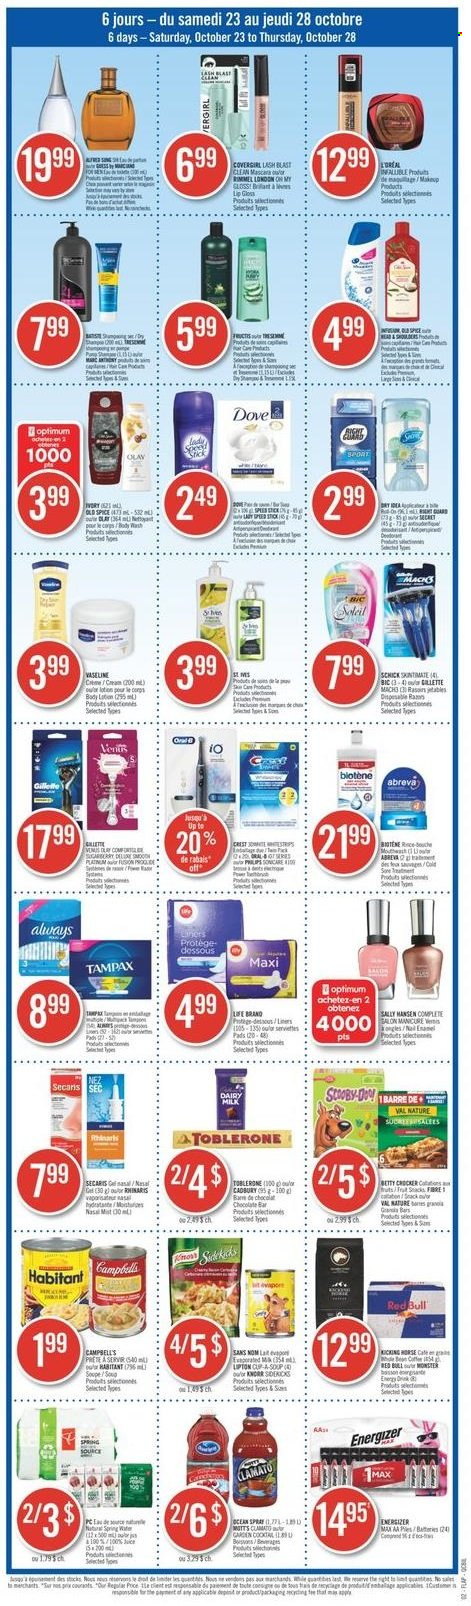 thumbnail - Pharmaprix Flyer - October 23, 2021 - October 28, 2021 - Sales products - soup, Toblerone, Dairy Milk, Parle, chocolate bar, spice, Monster, Clamato, Red Bull, Vaseline, mouthwash, Crest, Abreva, Olay, body lotion, BIC, Schick, manicure, makeup, cup, Energizer, Tampax, Old Spice, Lipton. Page 16.